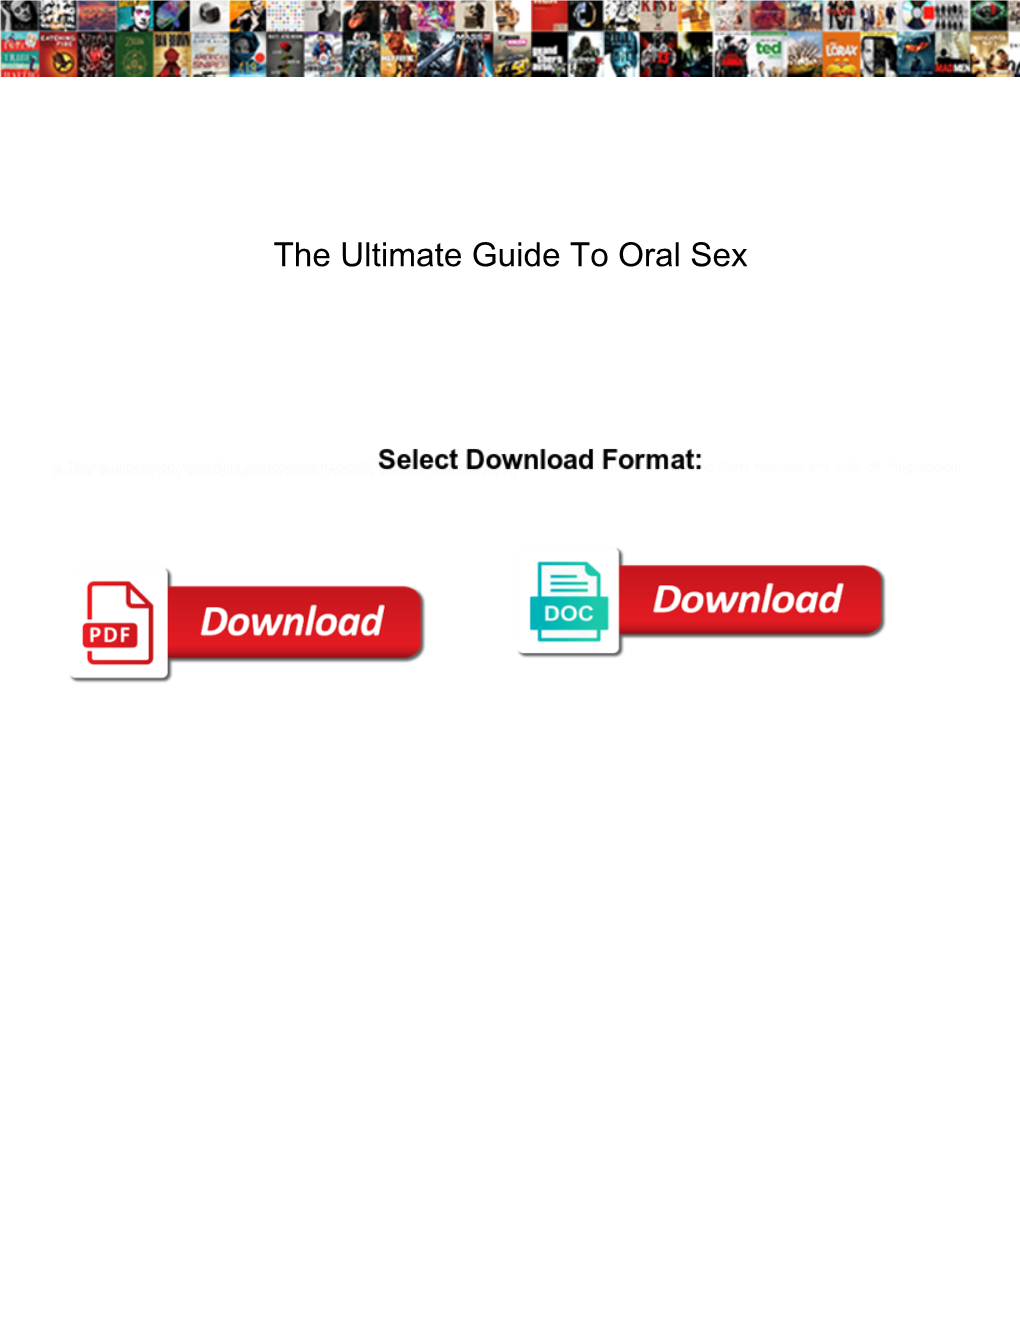 The Ultimate Guide to Oral Sex